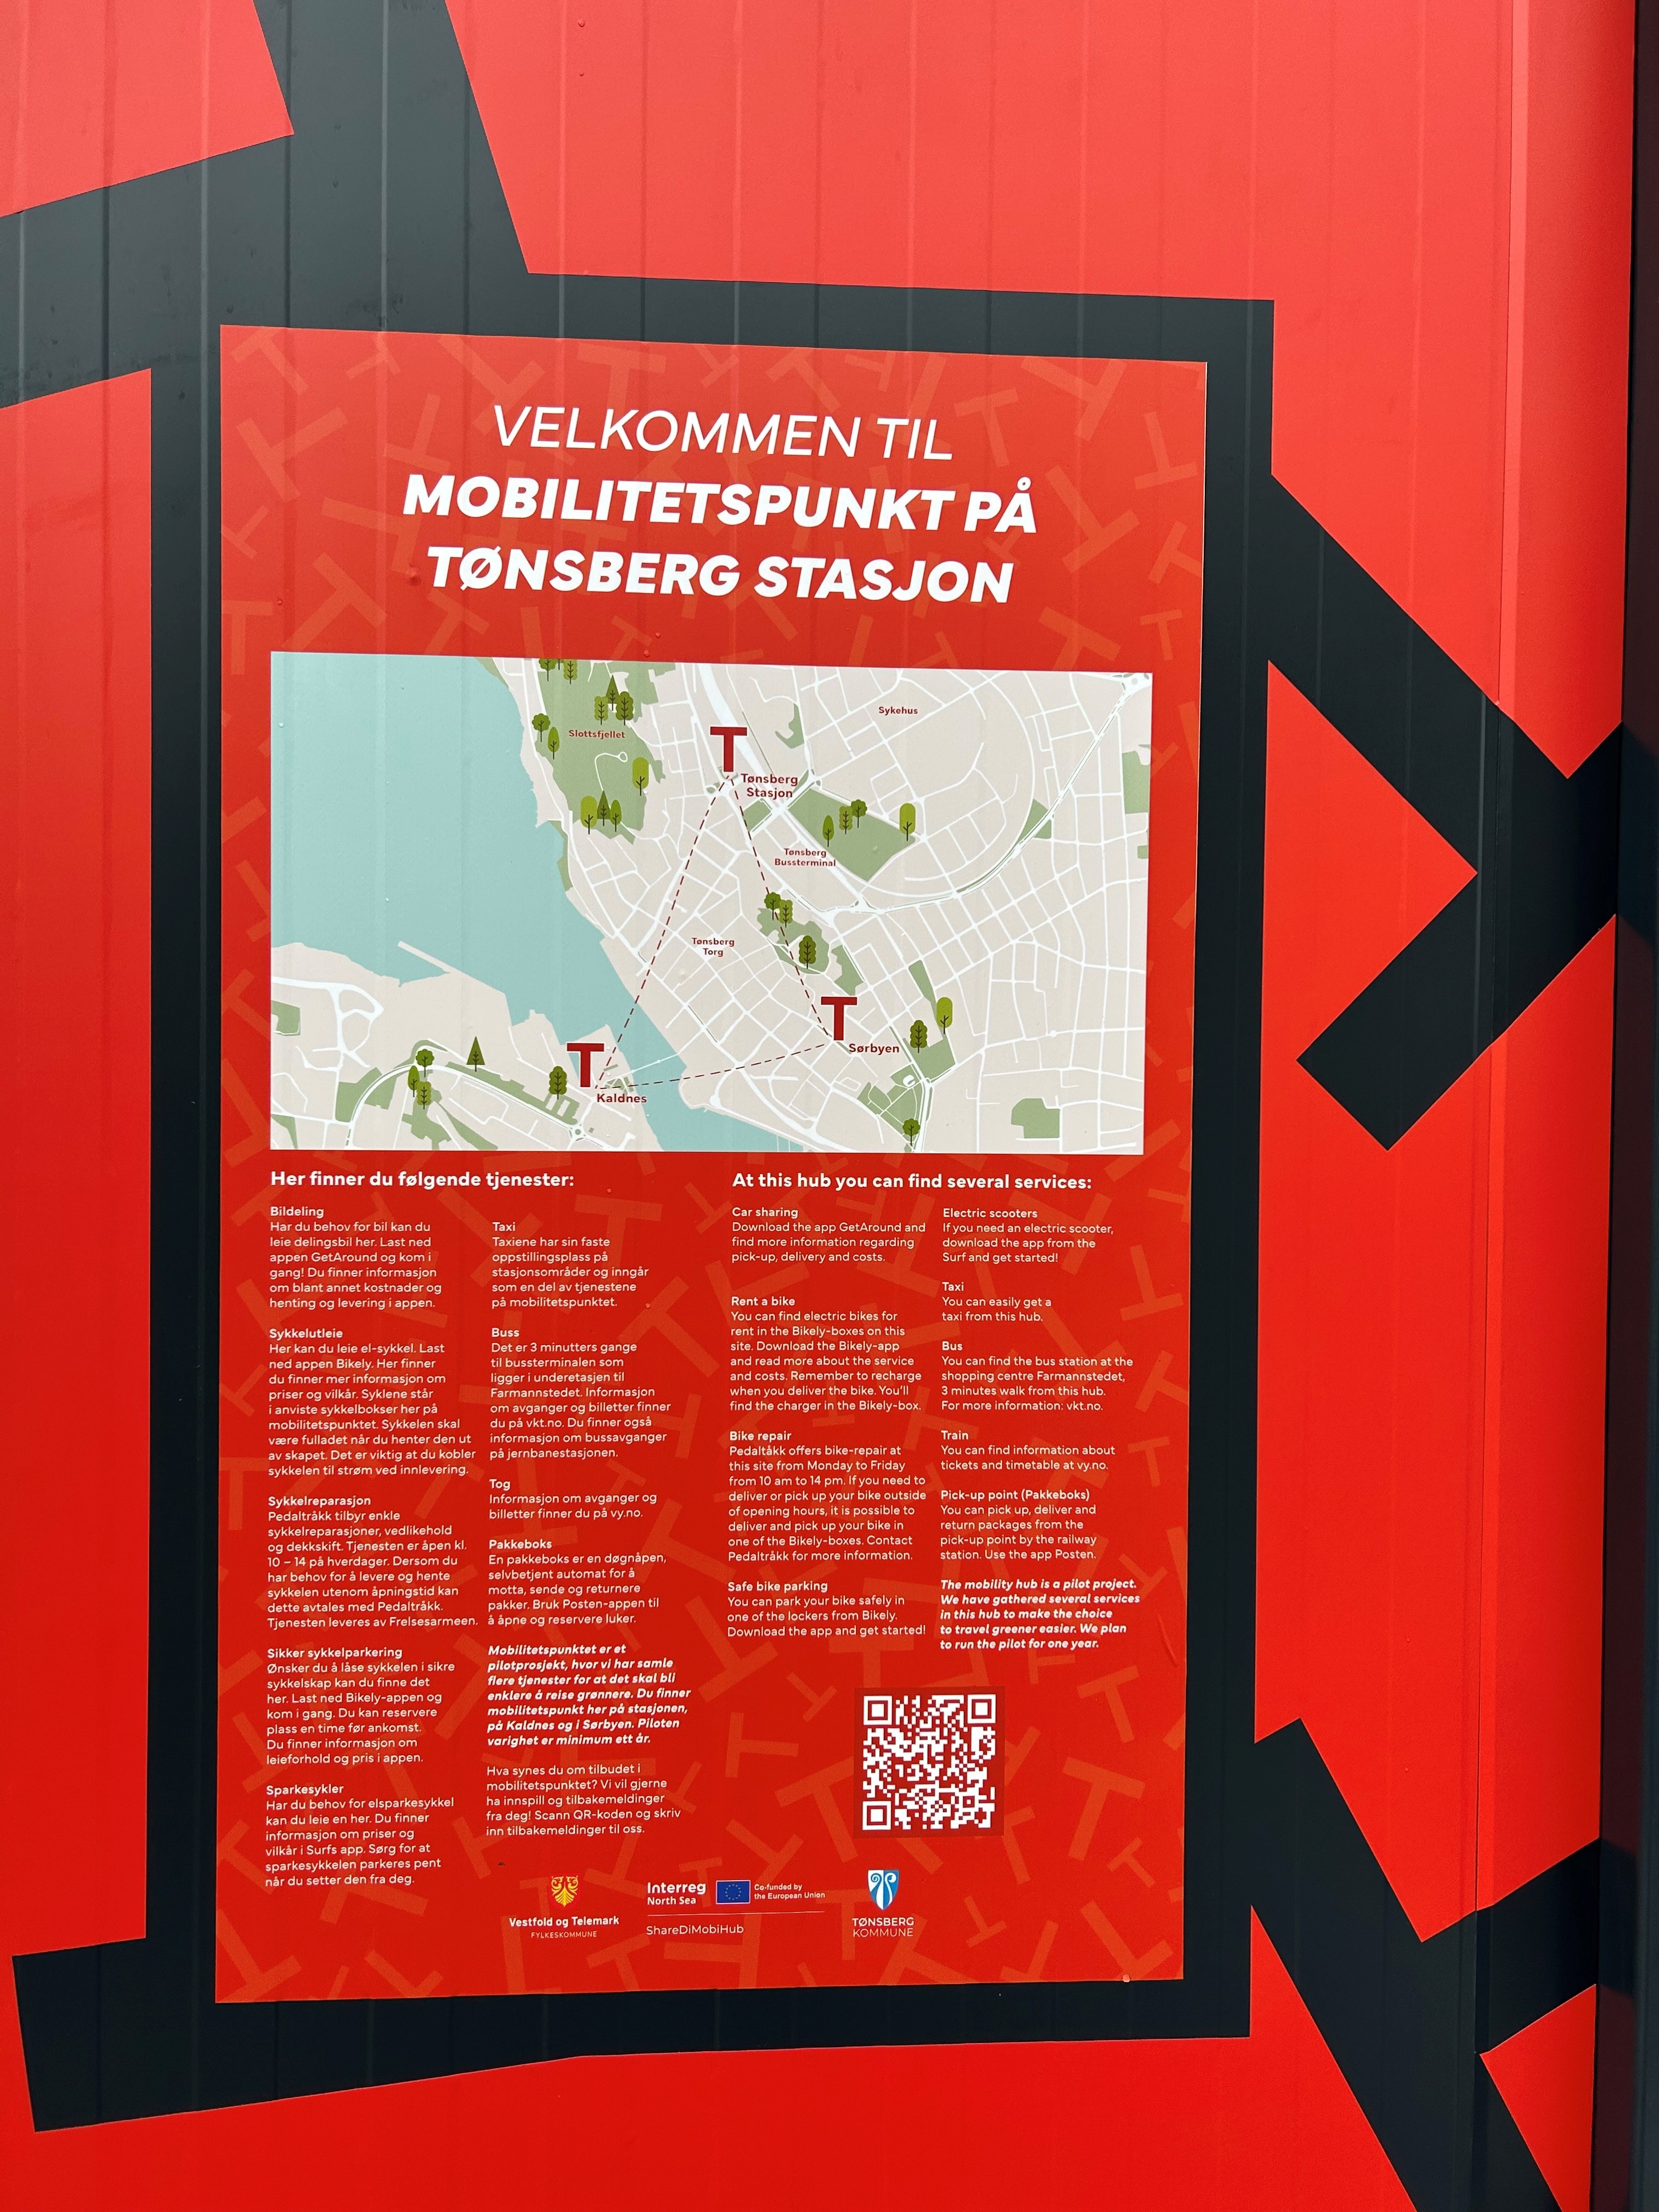 Image of the explanation note on the repairing spot of the shared mobility hub in Tonsberg